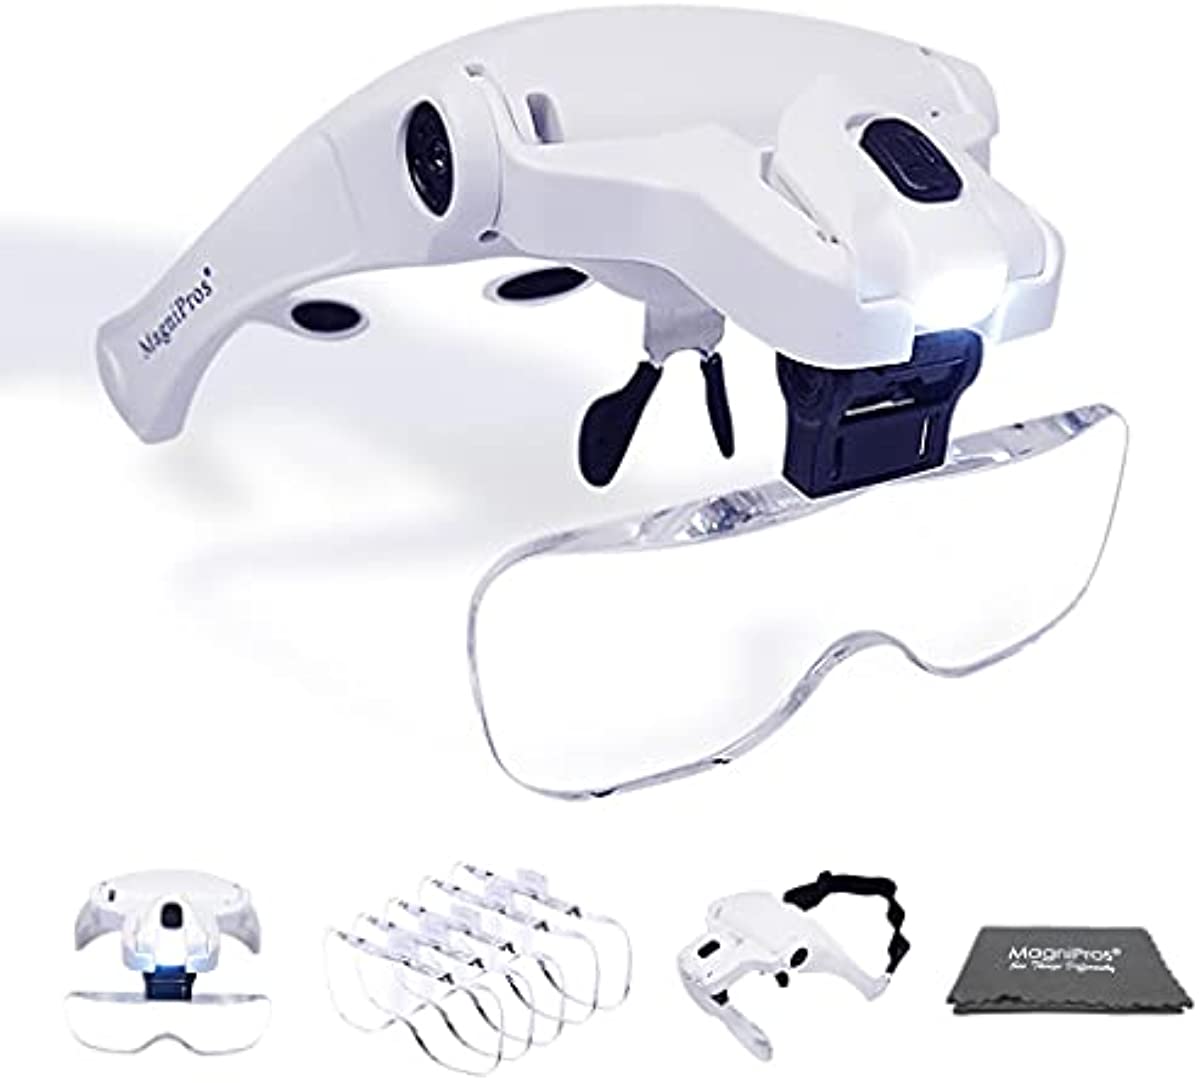 MagniPros LED Illuminated Headband Magnifier Visor | Hands Free Magnifier Loupe | 5 Detachable Lenses 1X, 1.5X, 2X, 2.5X 3.5X - (Upgraded Version) Hands-Free Head Worn Lighted Magnifying Glasses